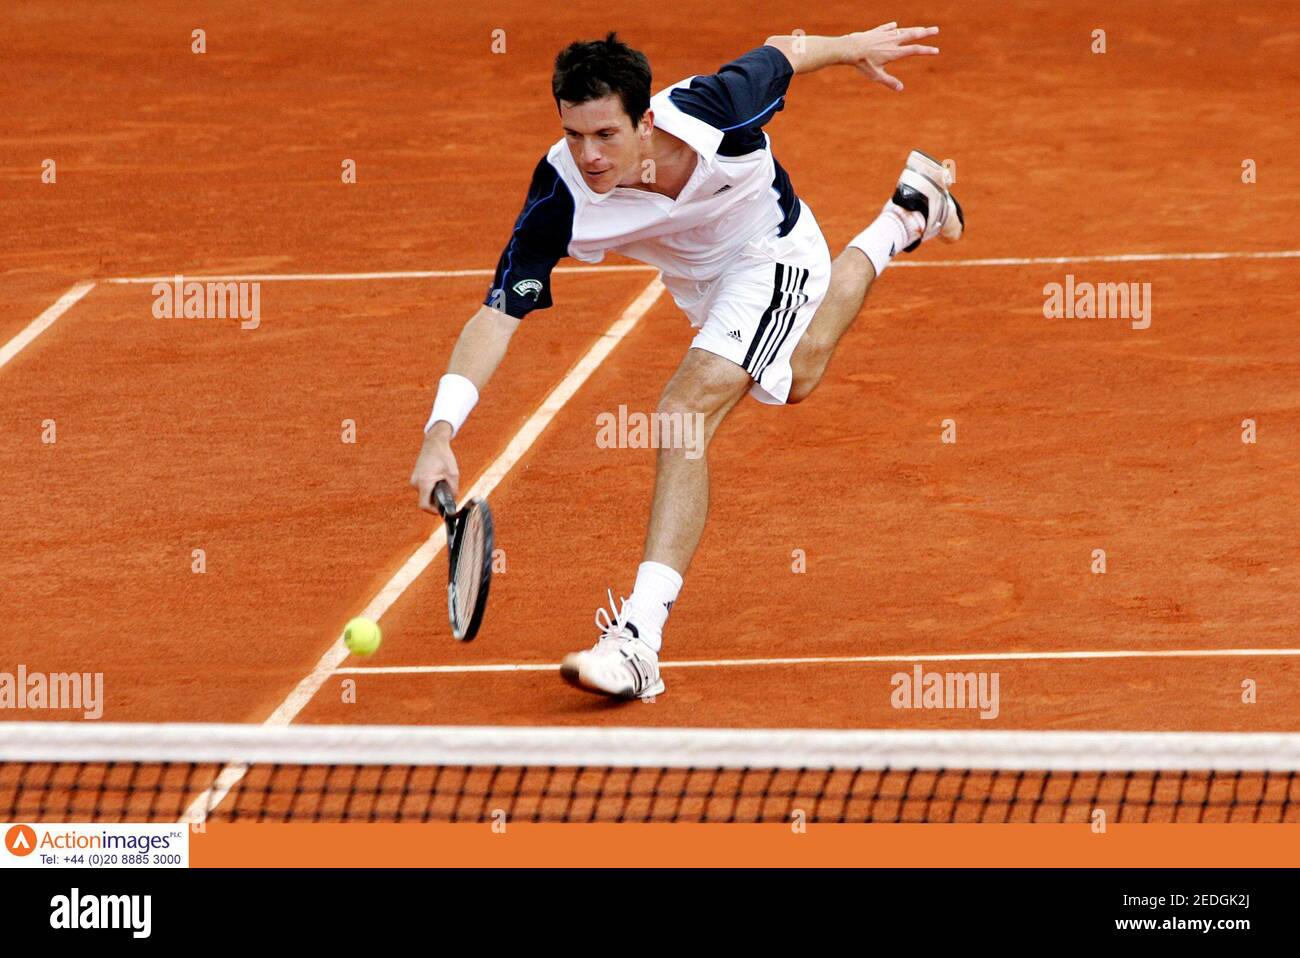 Tennis - French Open - Stade Roland Garros - 23/5/05  Great Britain's Tim Henman lunges for a shot during his match against Juan Pablo Brzezicki of Argentina    Mandatory Credit: Action Images / Jason O'Brien  Livepic Stock Photo